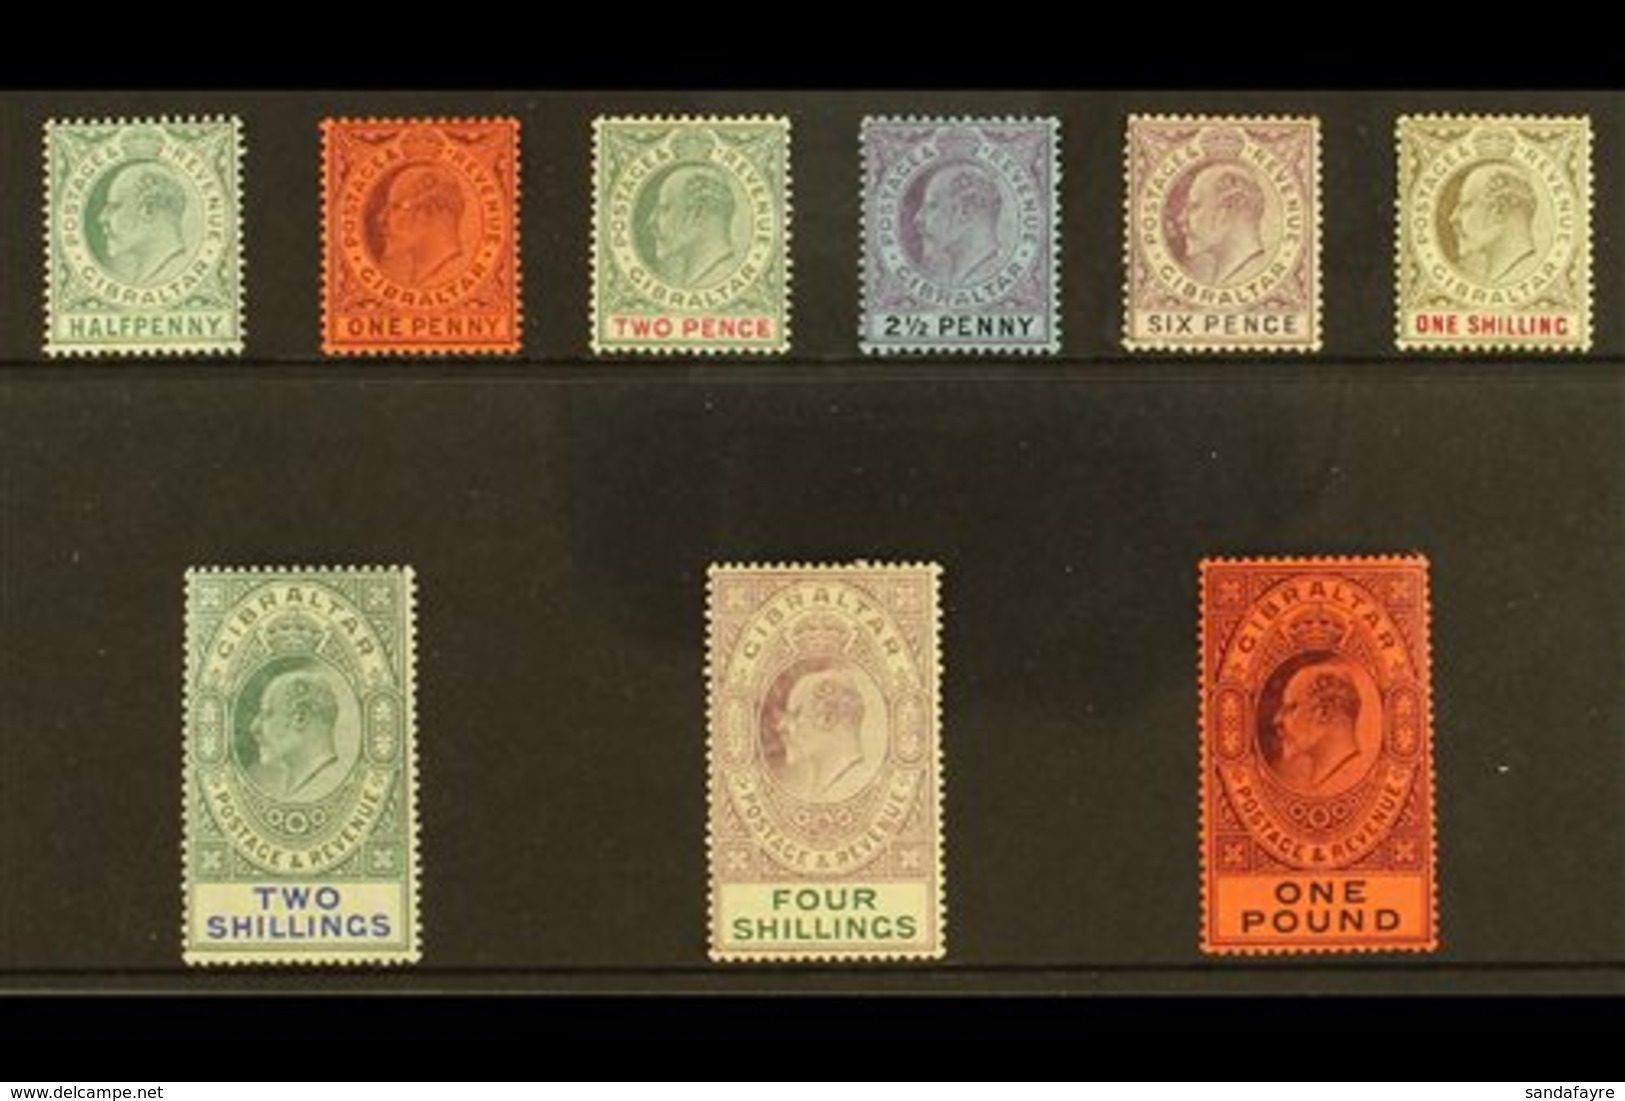 1904-08 KEVII Definitive Set, SG 56/64, Some Tiny Imperfections, Generally Fine Mint, The £1 Value Is Superb With Virtua - Gibilterra